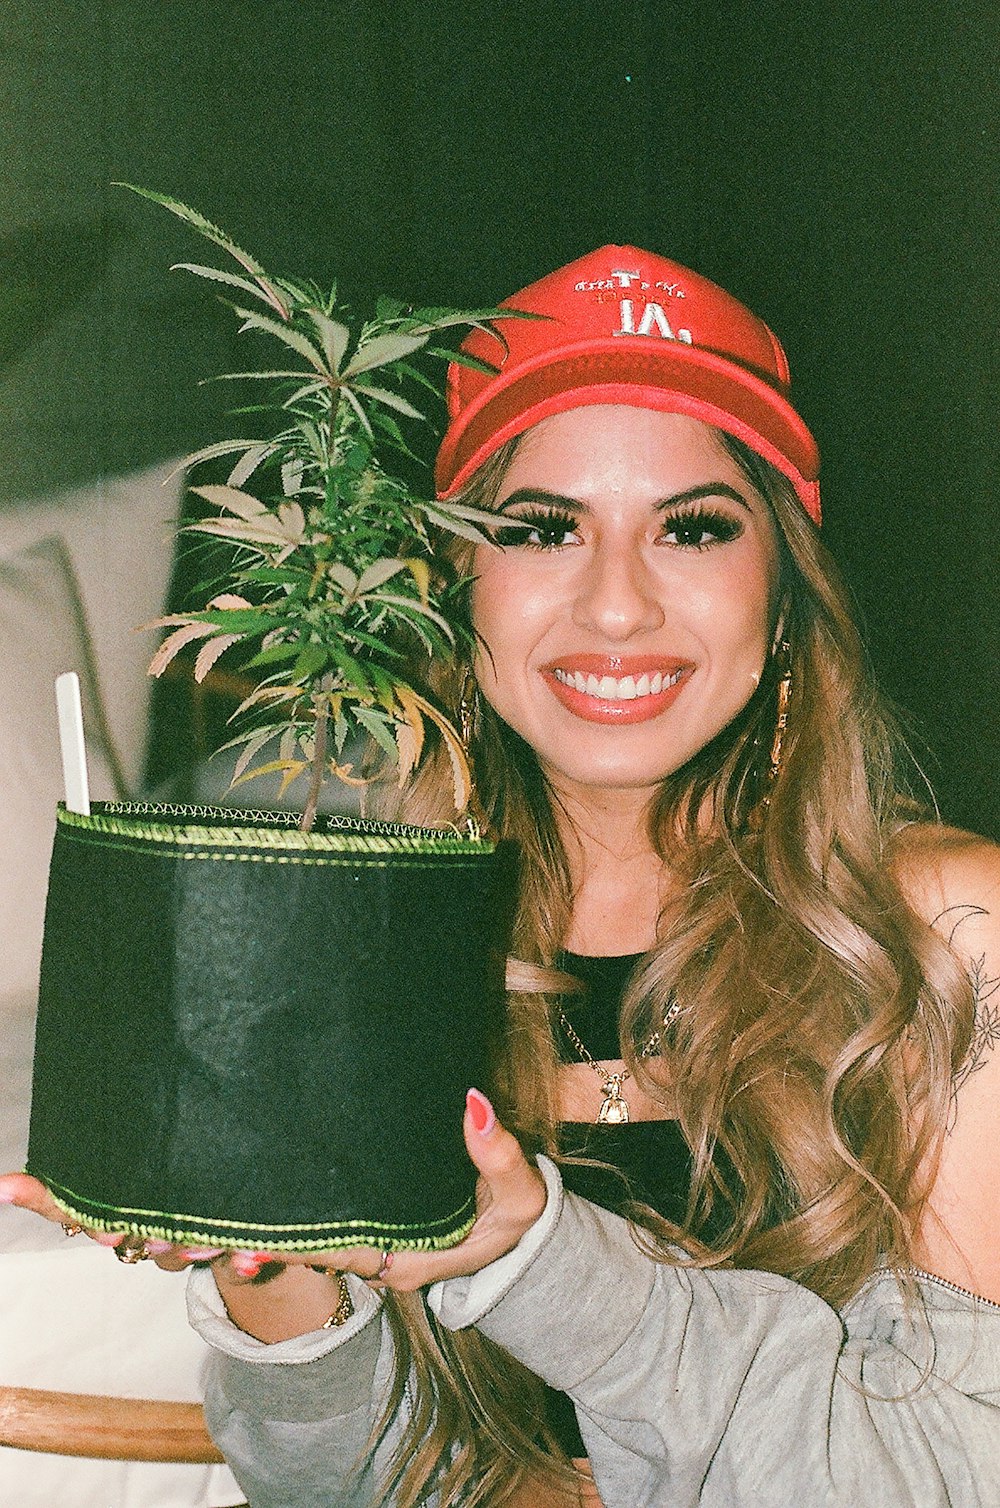 a woman holding a potted plant in her hand